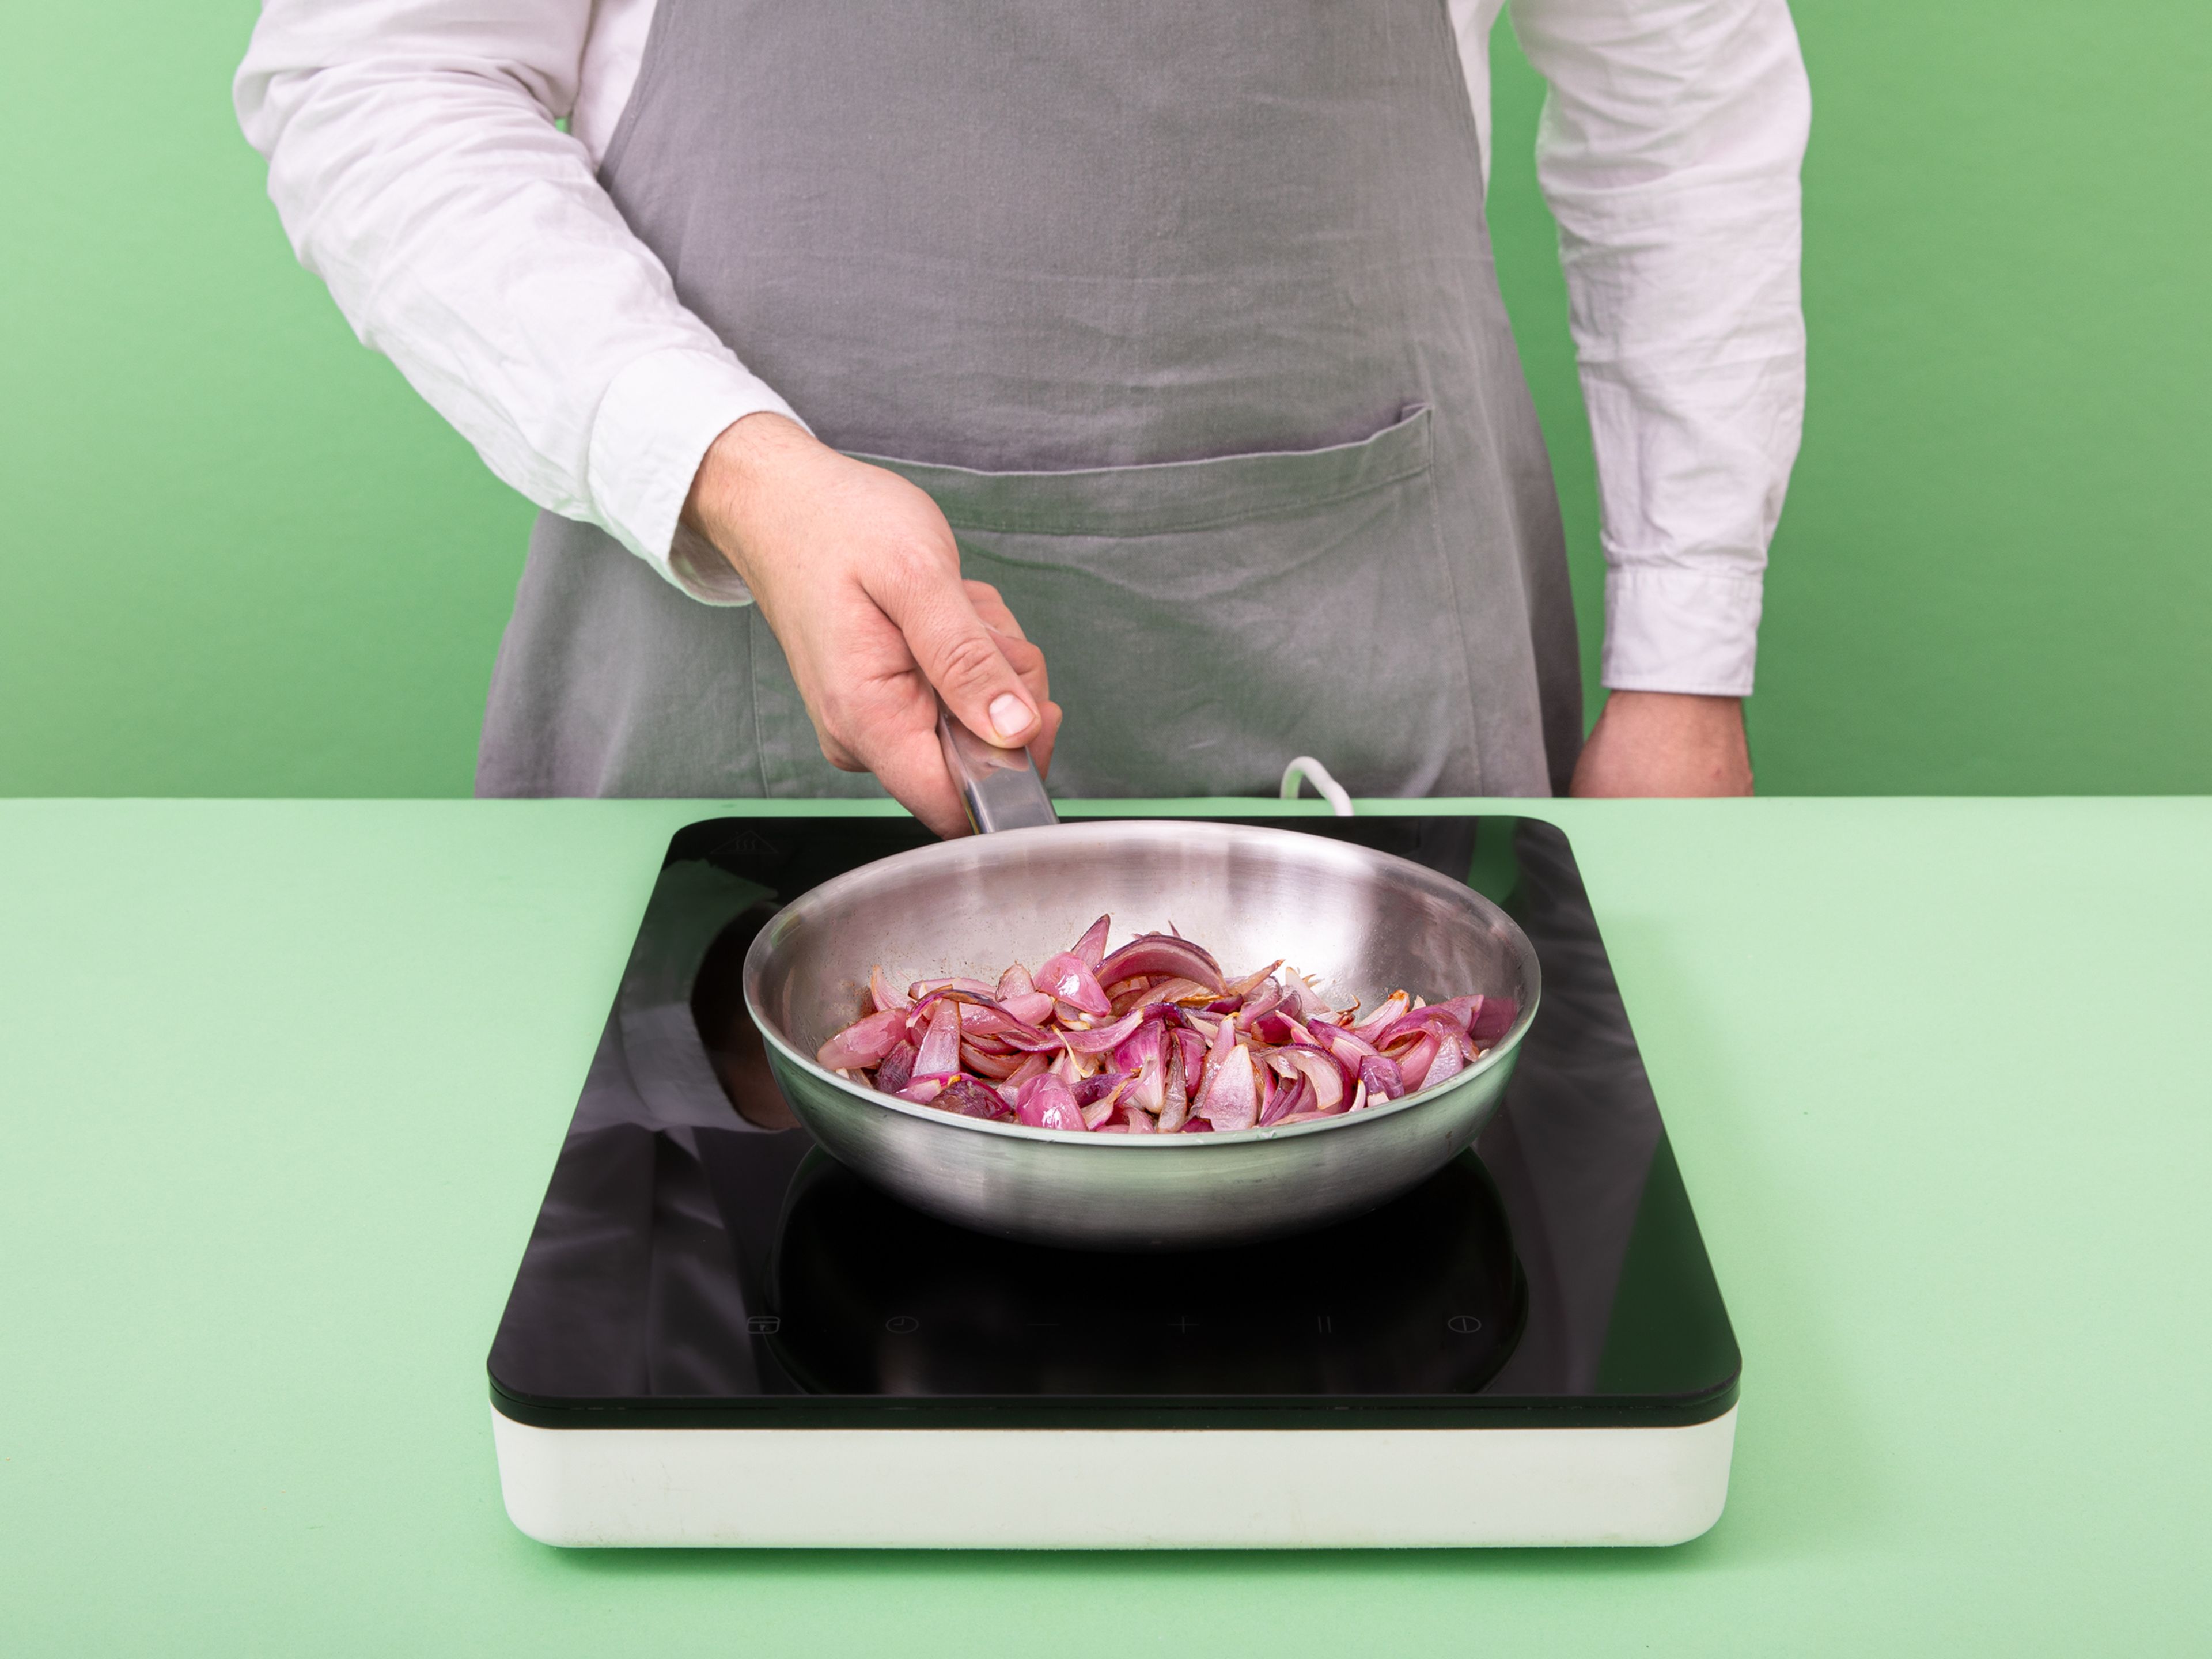 Peel the red onion and cut them into eighths. Heat a pan over medium heat. Add some olive oil and red onions to the pan and sauté until soft, approx. 3 min. Add sugar and a pinch of salt. Continue sautéing until onions caramelize, approx. 10 min.